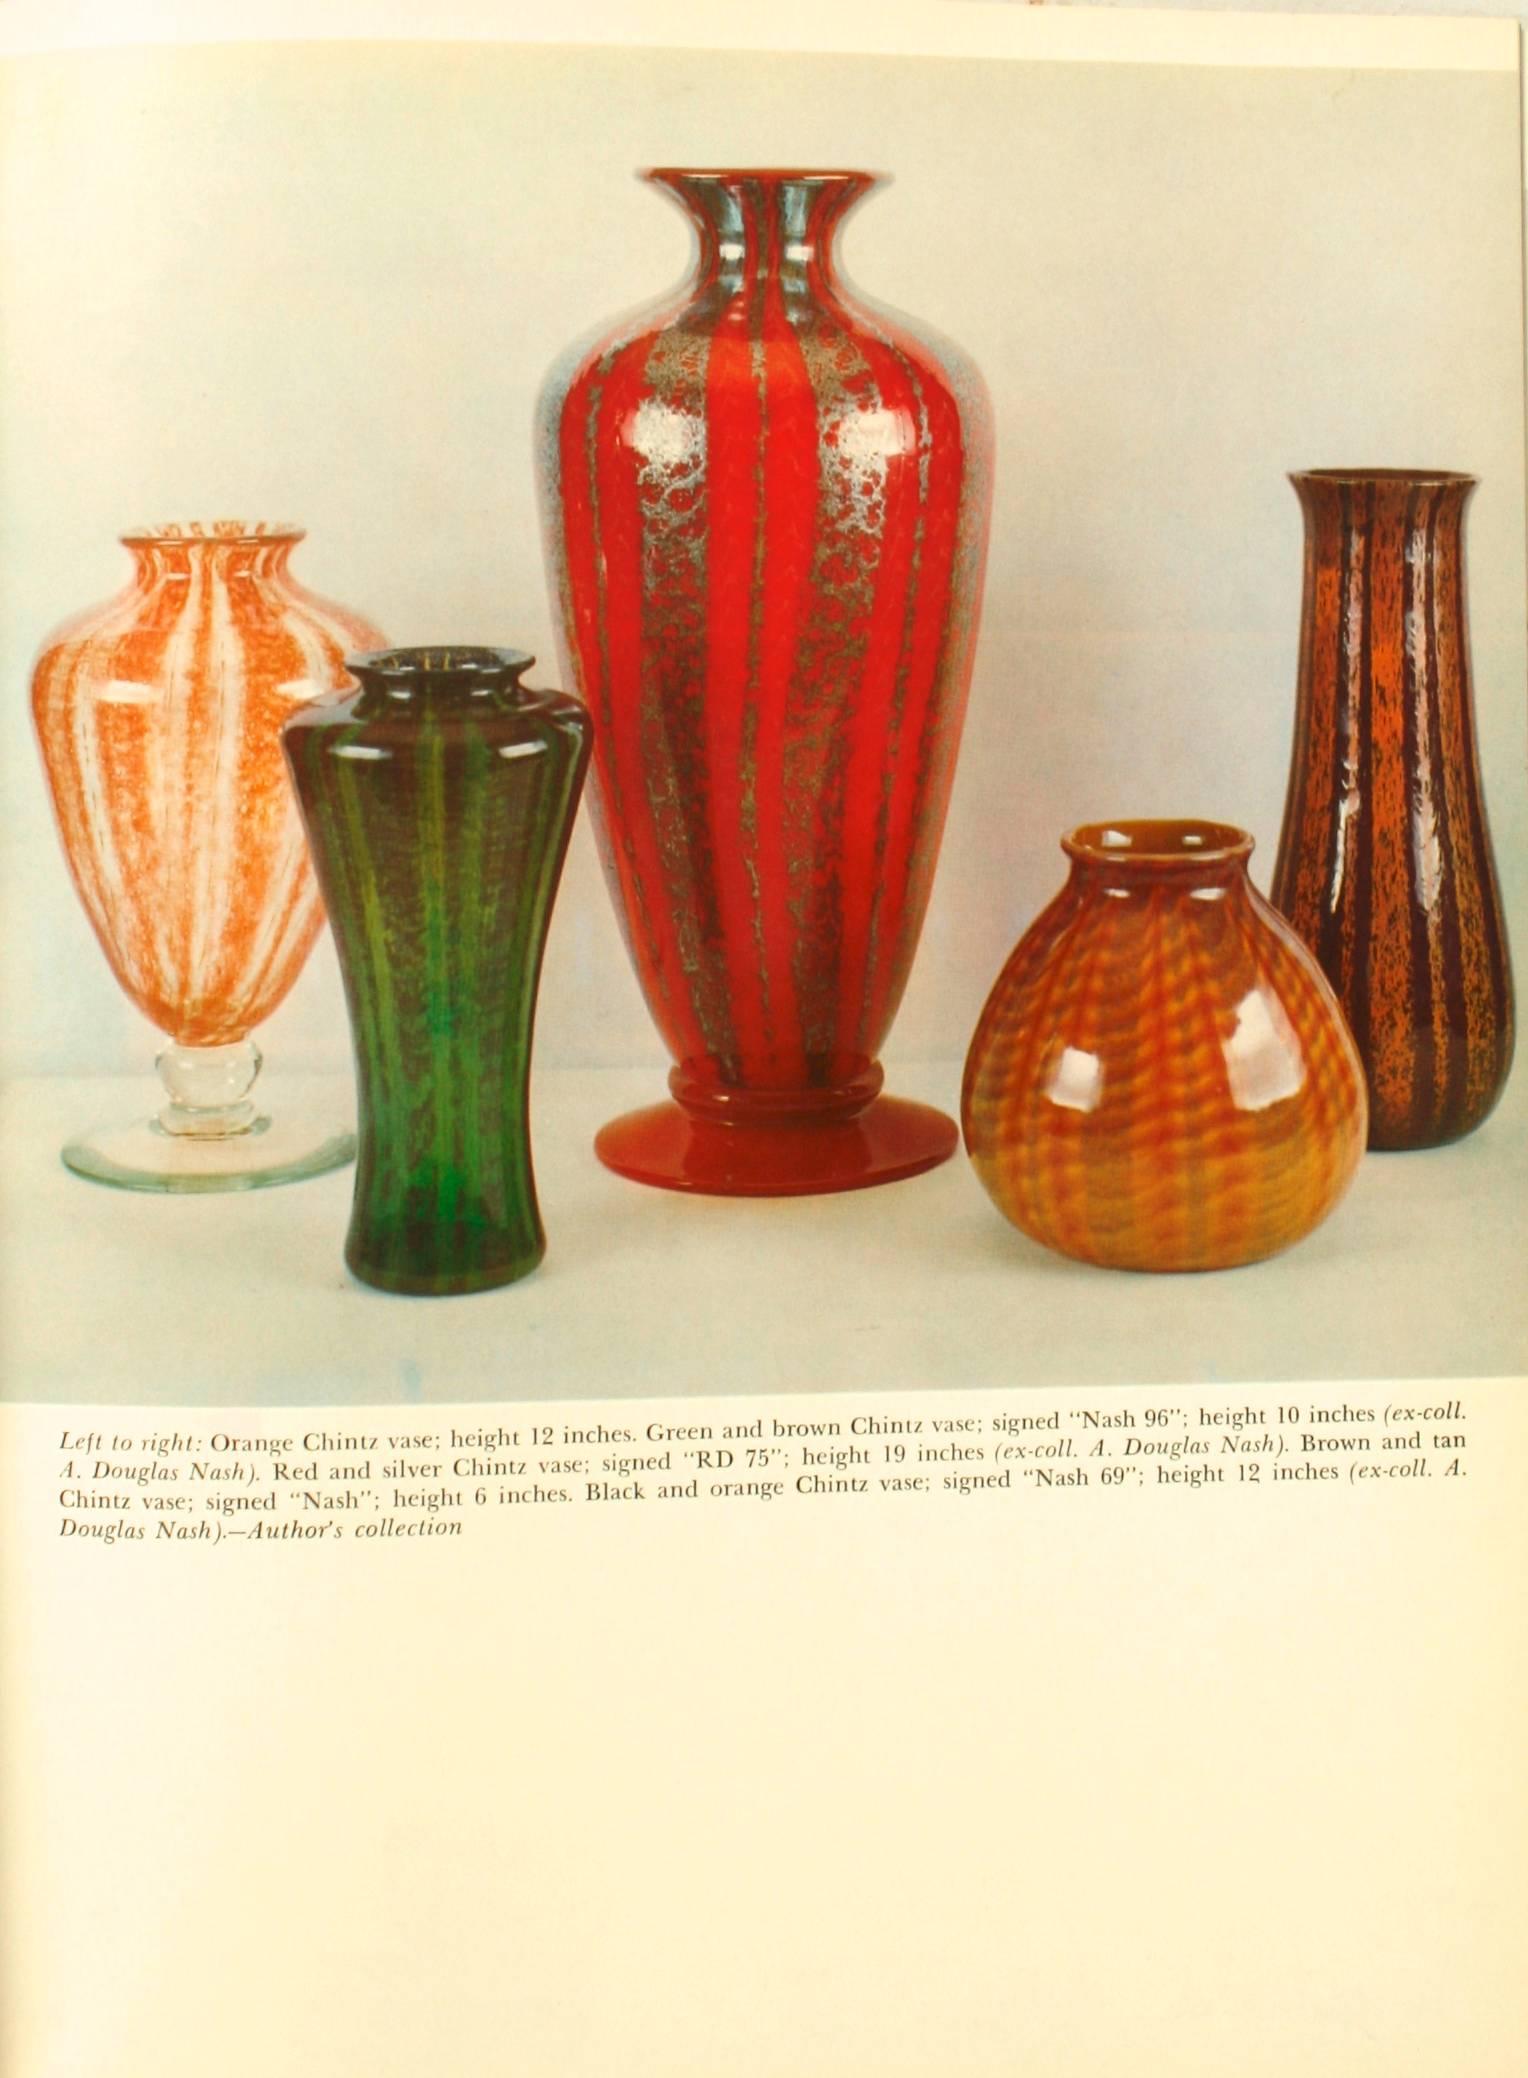 American Art Nouveau glass by Albert C Revi. Nashville, Thomas Nelson, 1968. First Edition 476p hardcover with dust jacket. The closing years of the 19th century witnessed more radical changes in the decorative arts than the whole previous century.